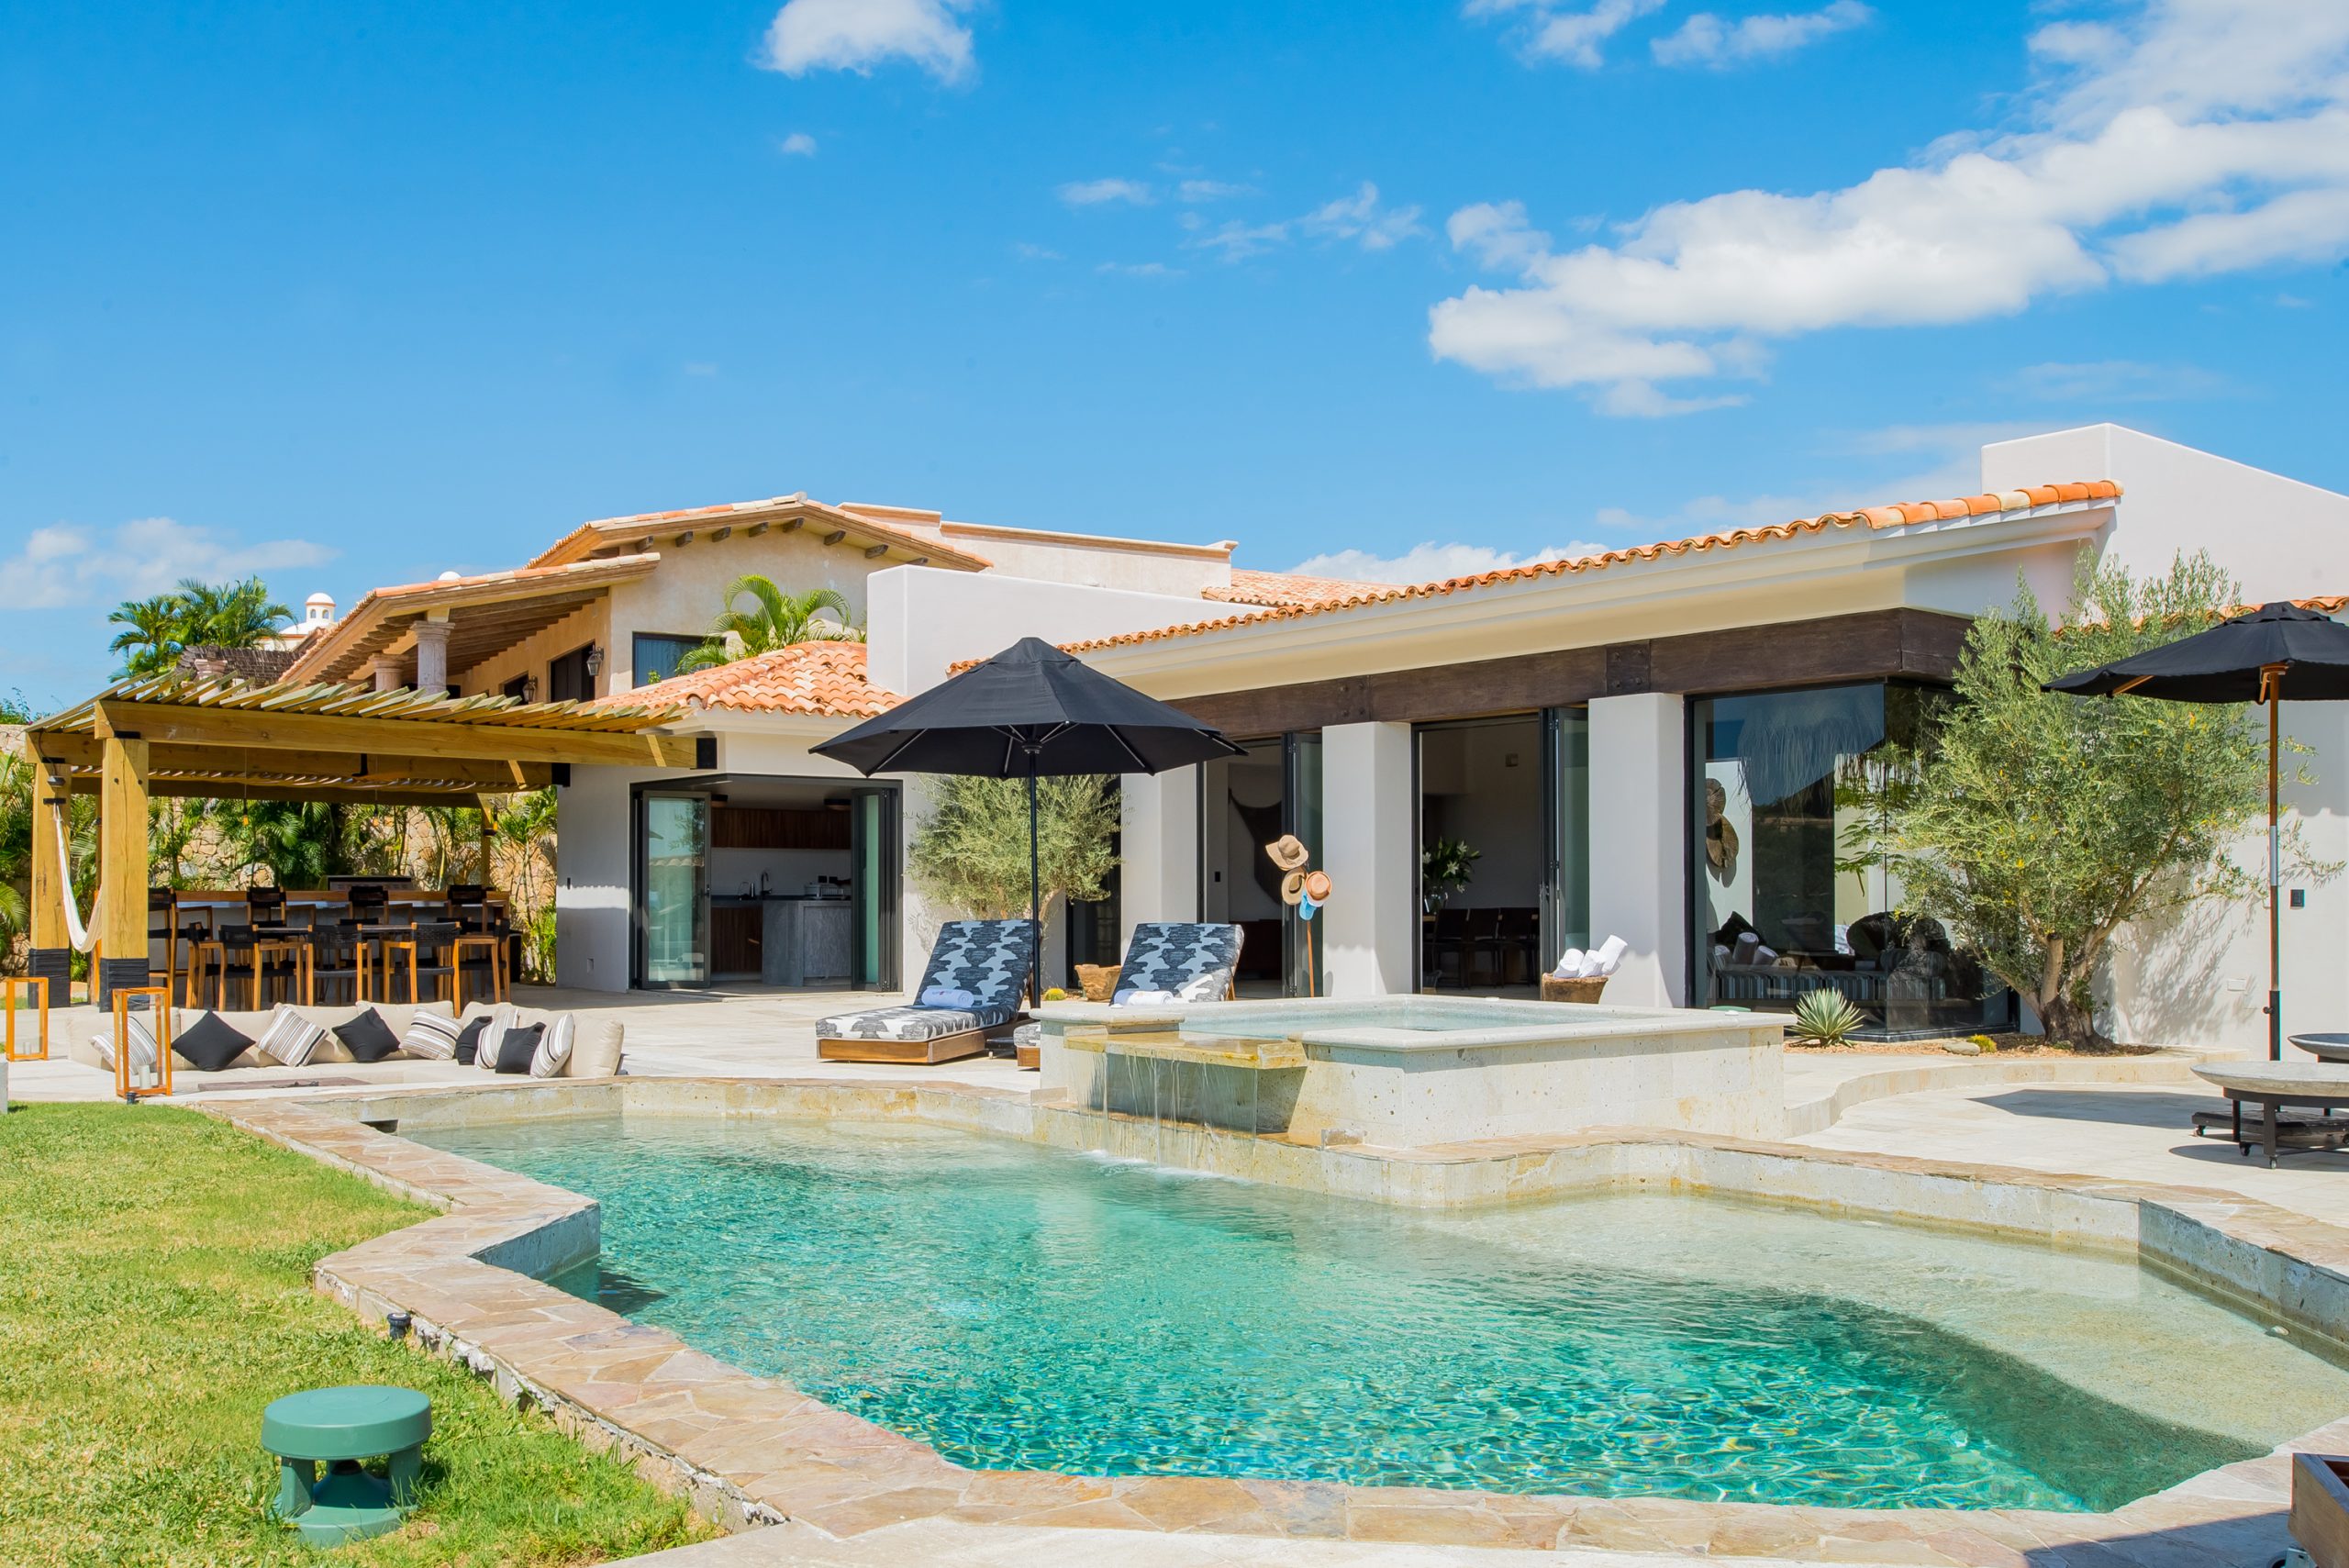 Mexico’s Luxury Real Estate For Sale